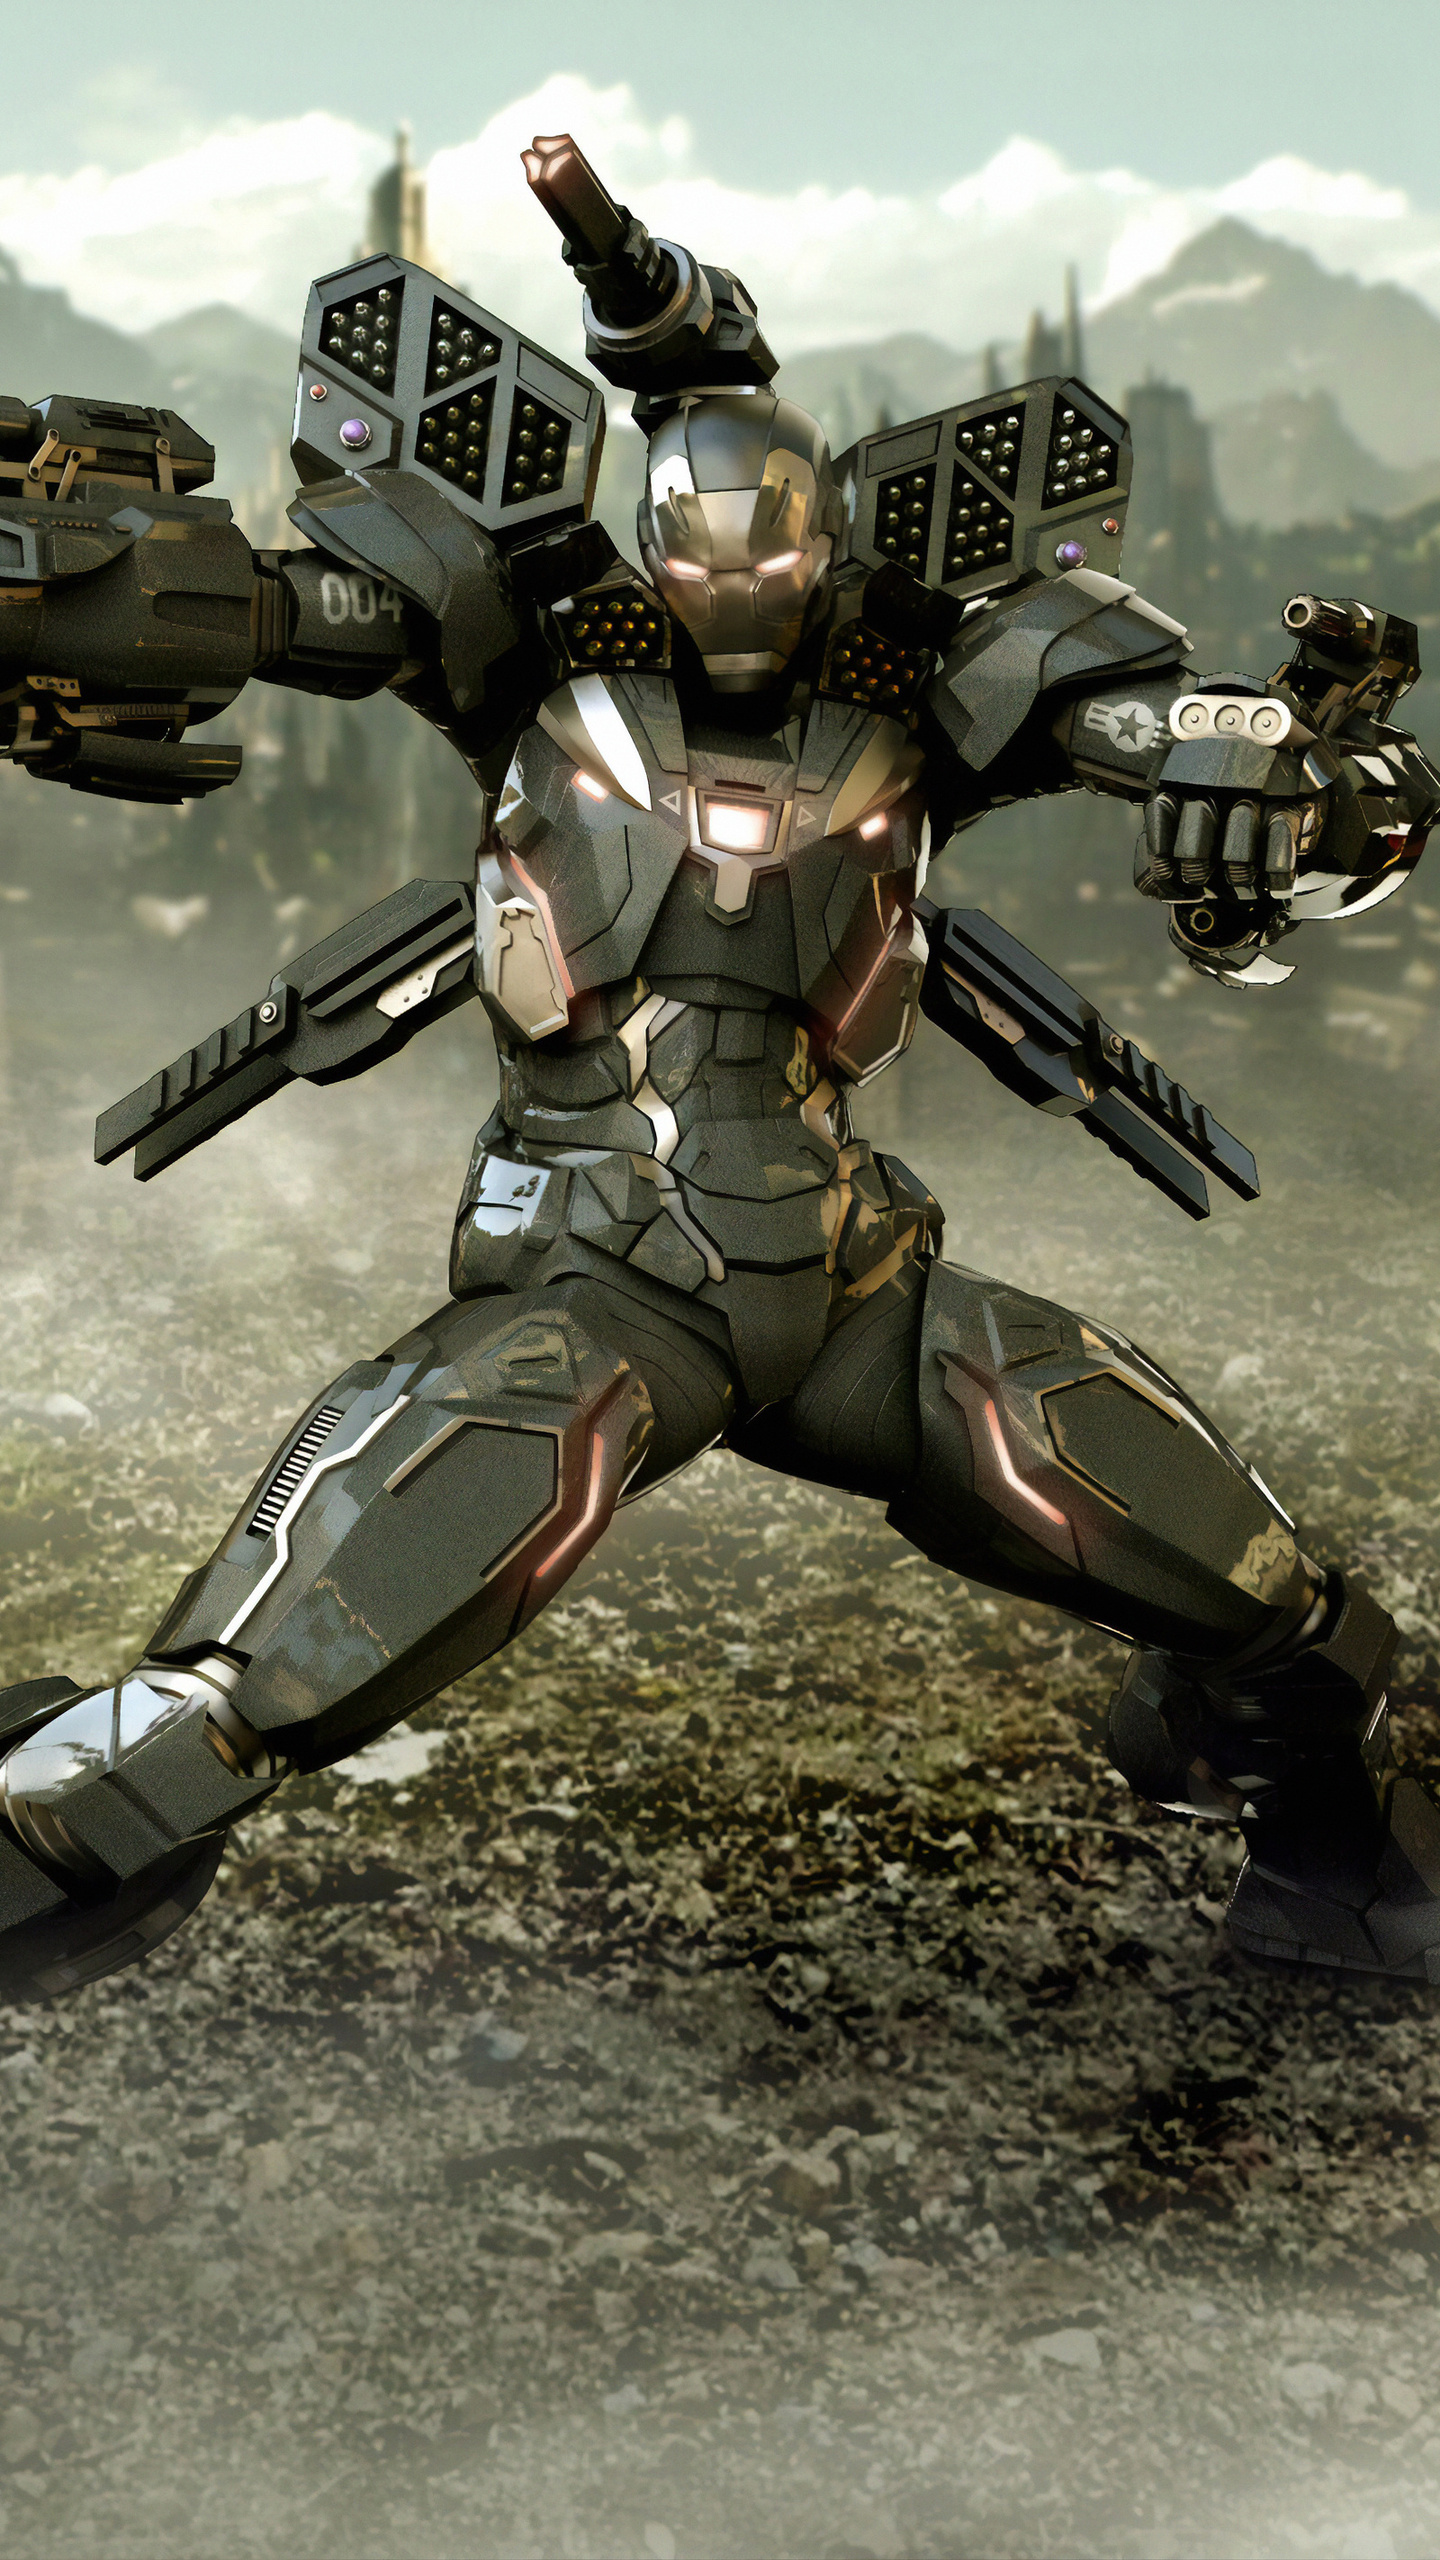 Warmachine In Avengers Endgame Wallpapers